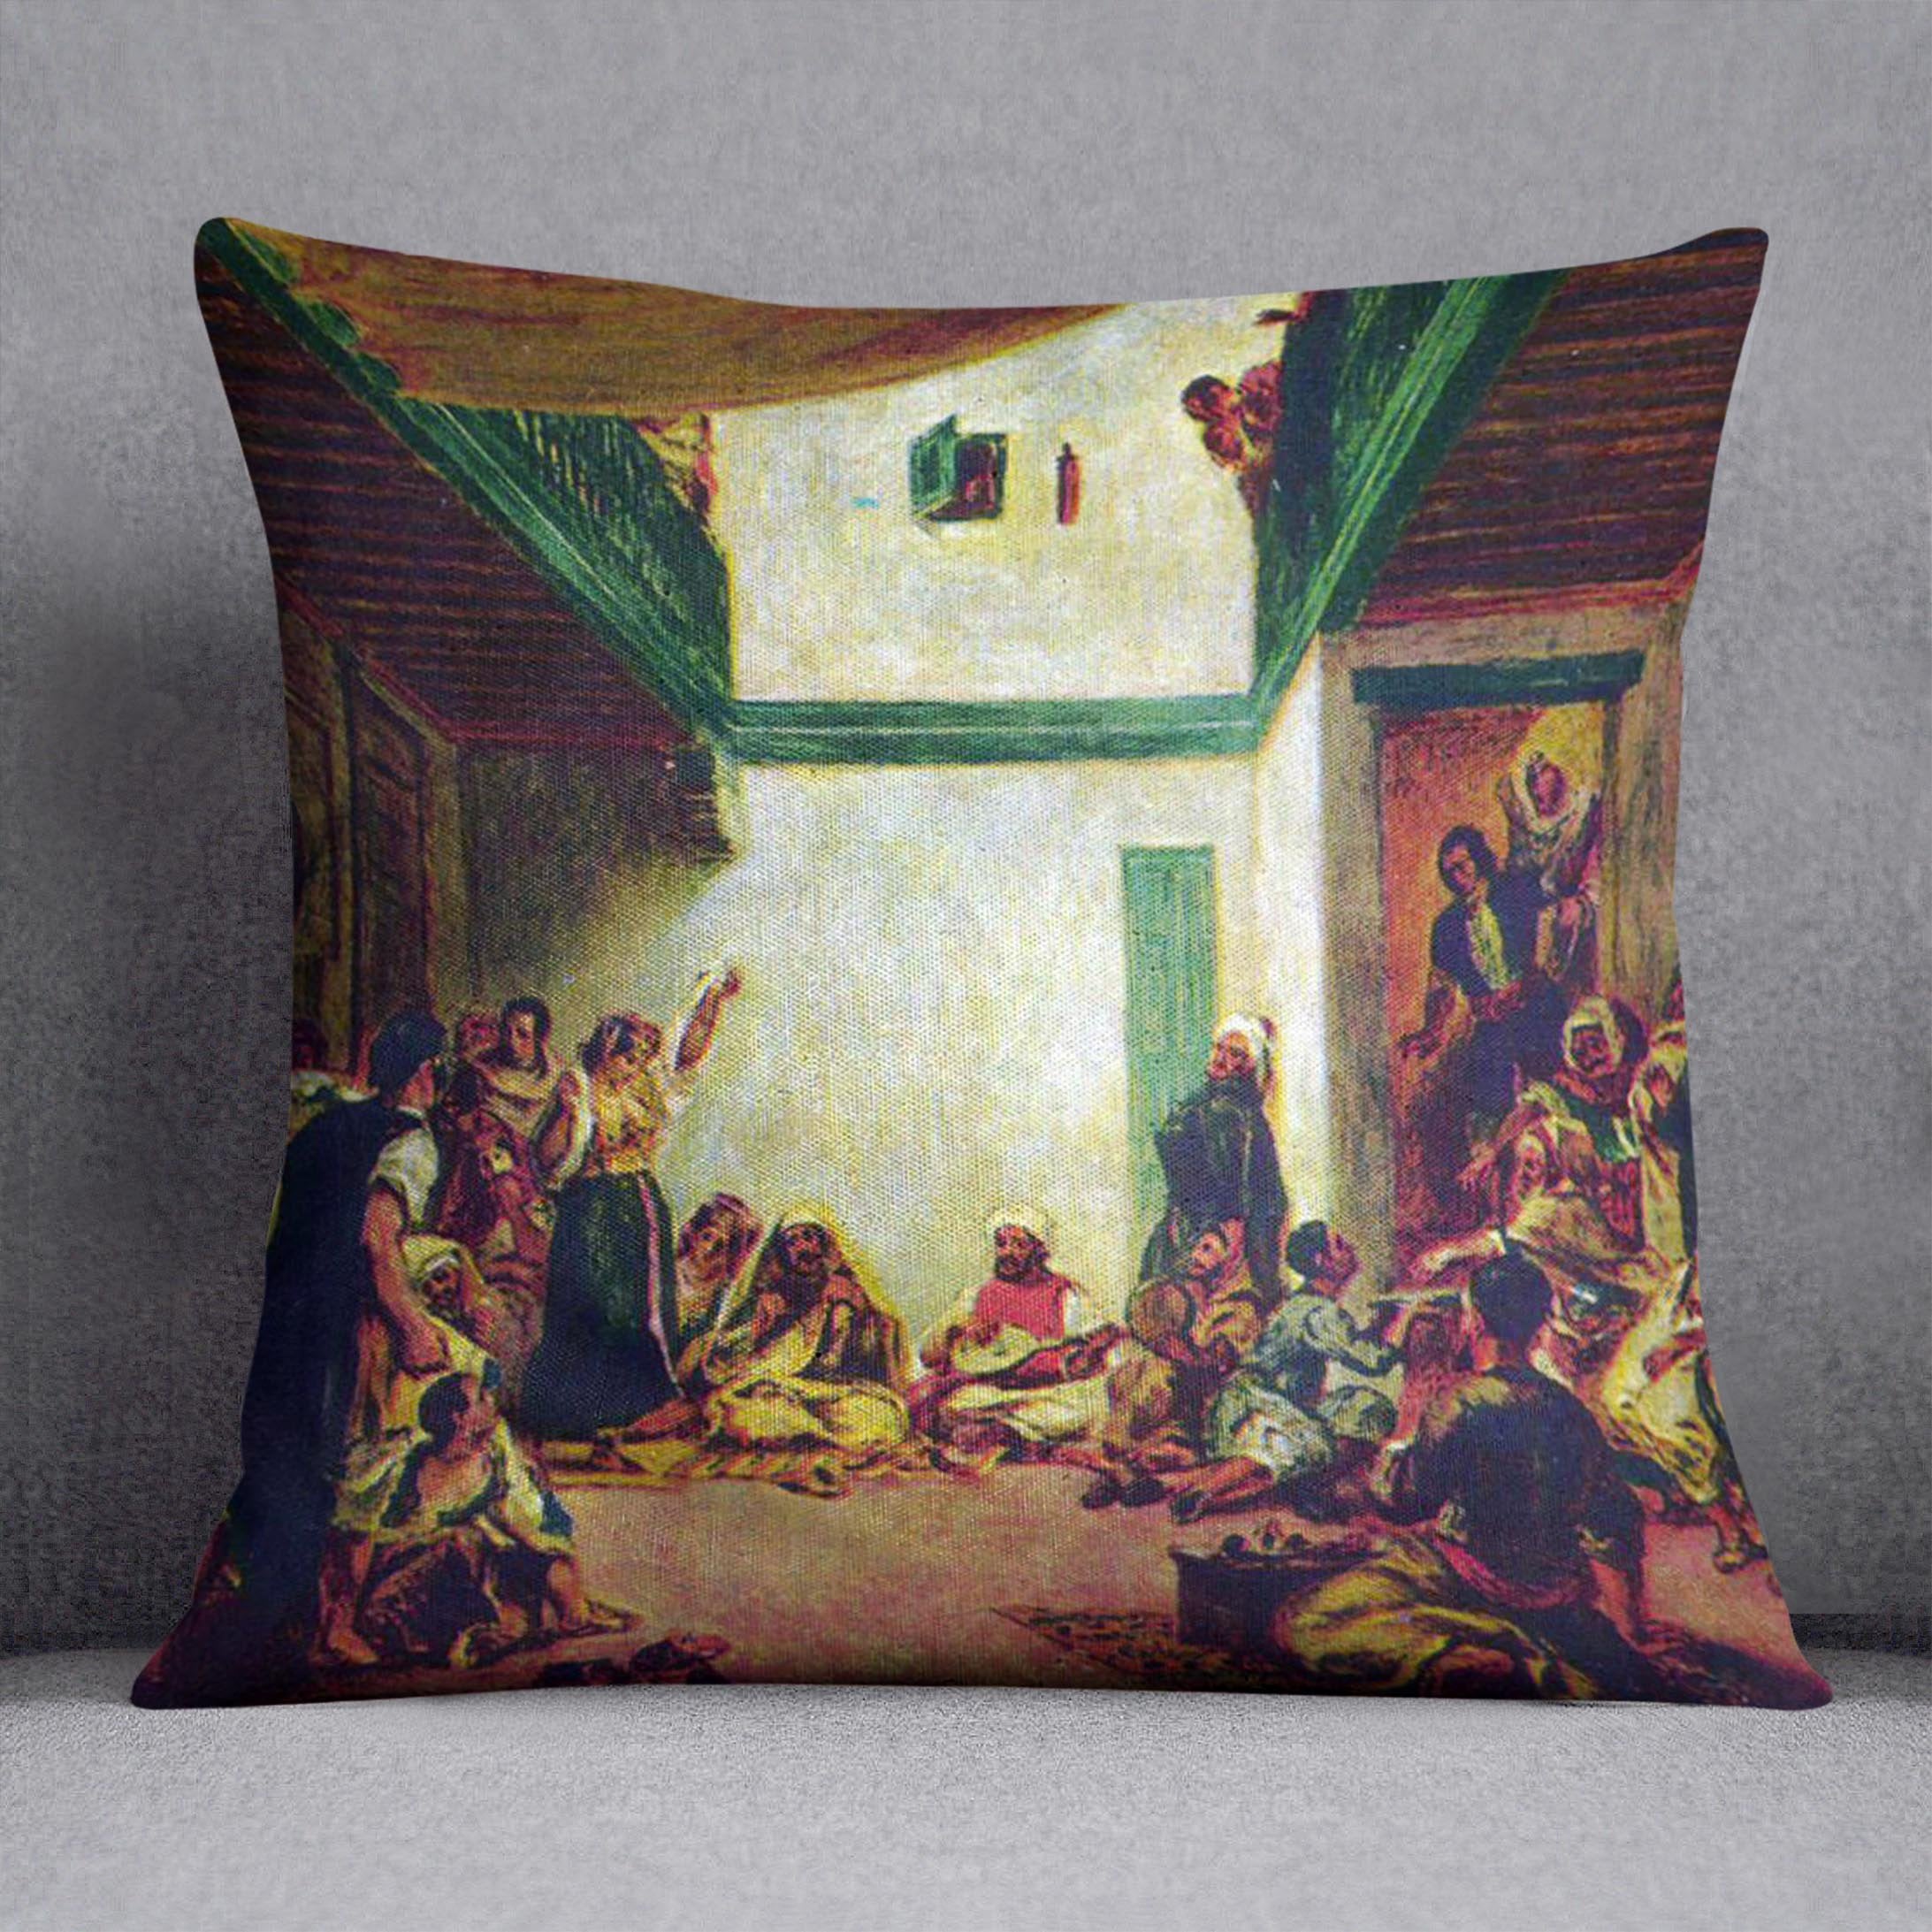 Jewish wedding after Delacroix by Renoir Throw Pillow